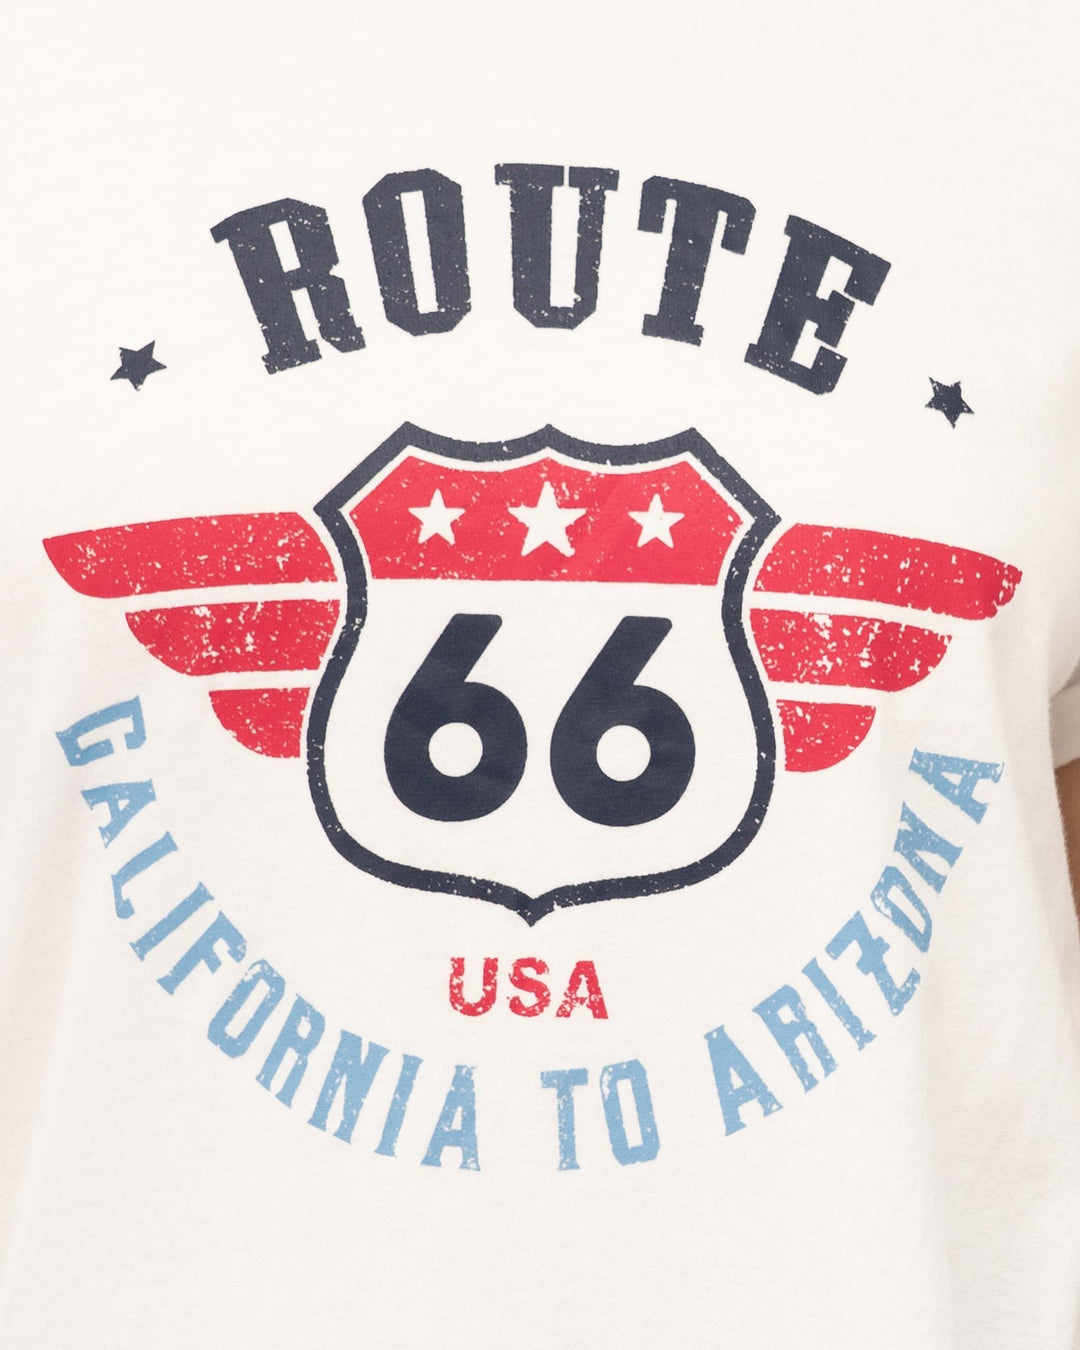 Paper Heart Route 66 Tee